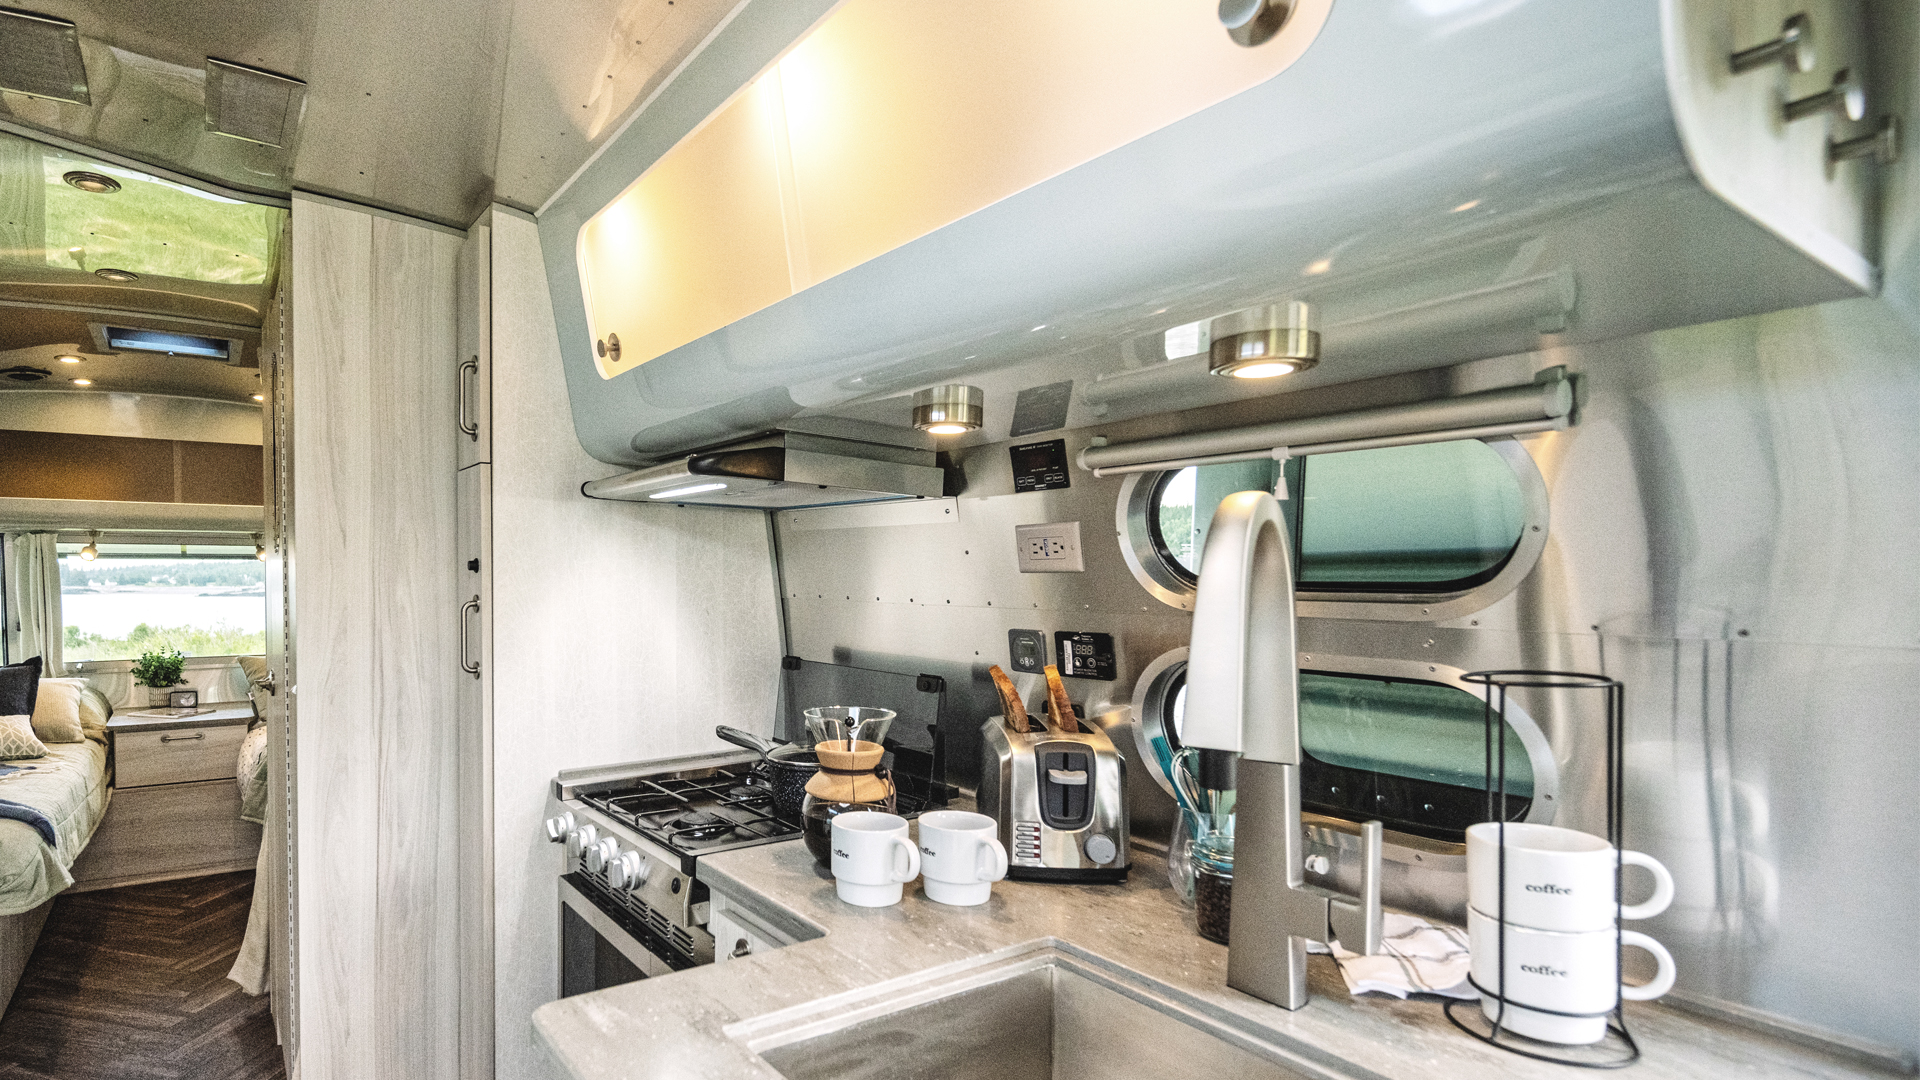 The galley with breakfast food and supplies sitting on the counter of the Airstream International travel trailer.